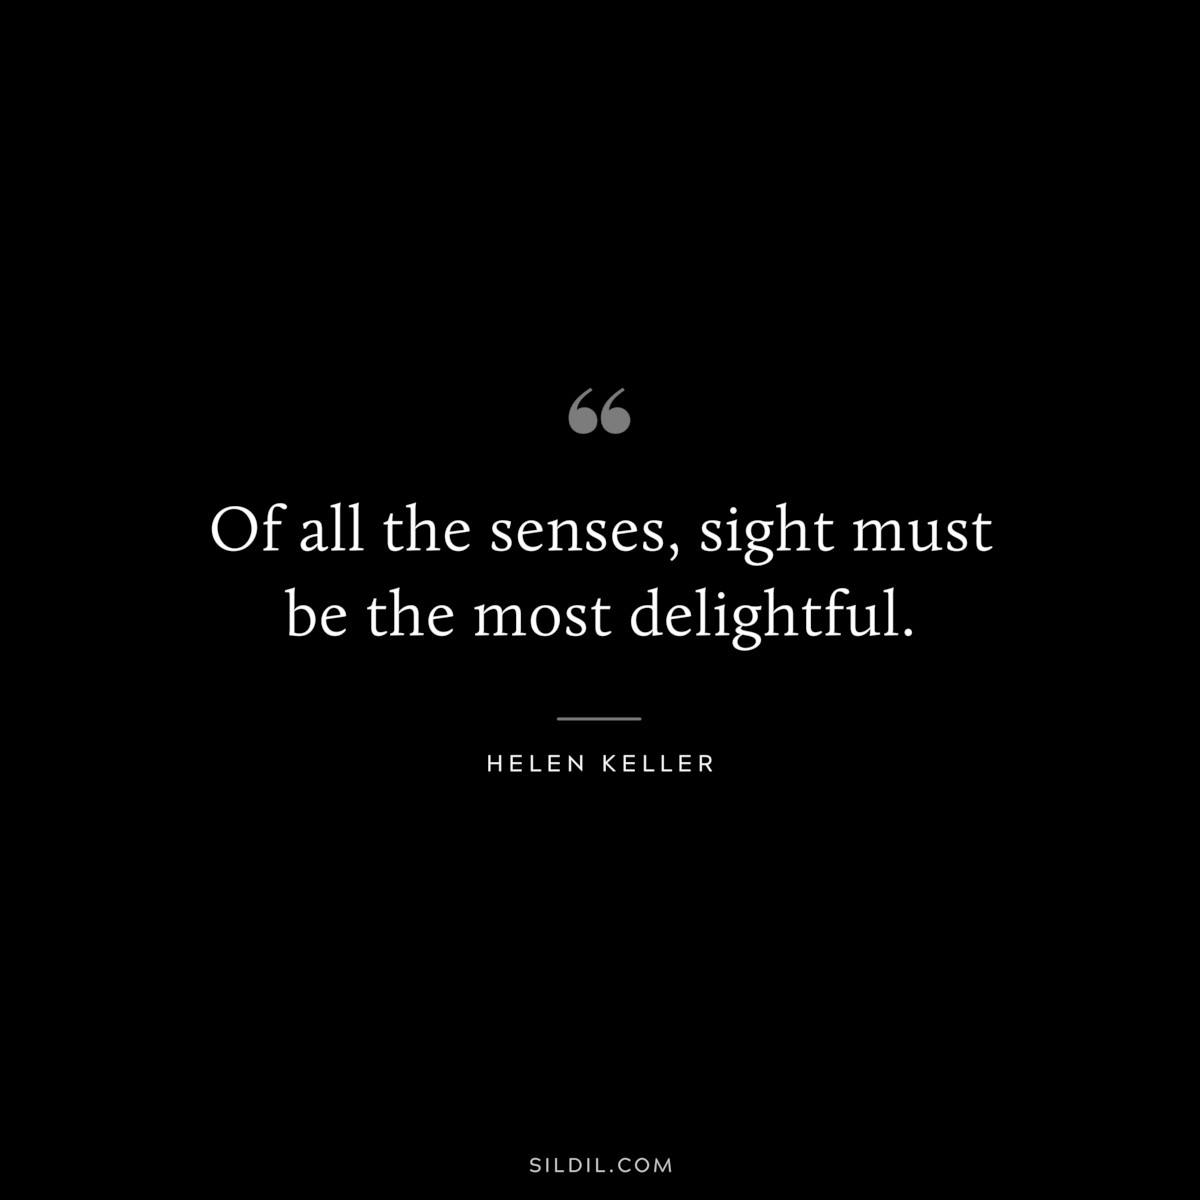 Of all the senses, sight must be the most delightful. ― Helen Keller